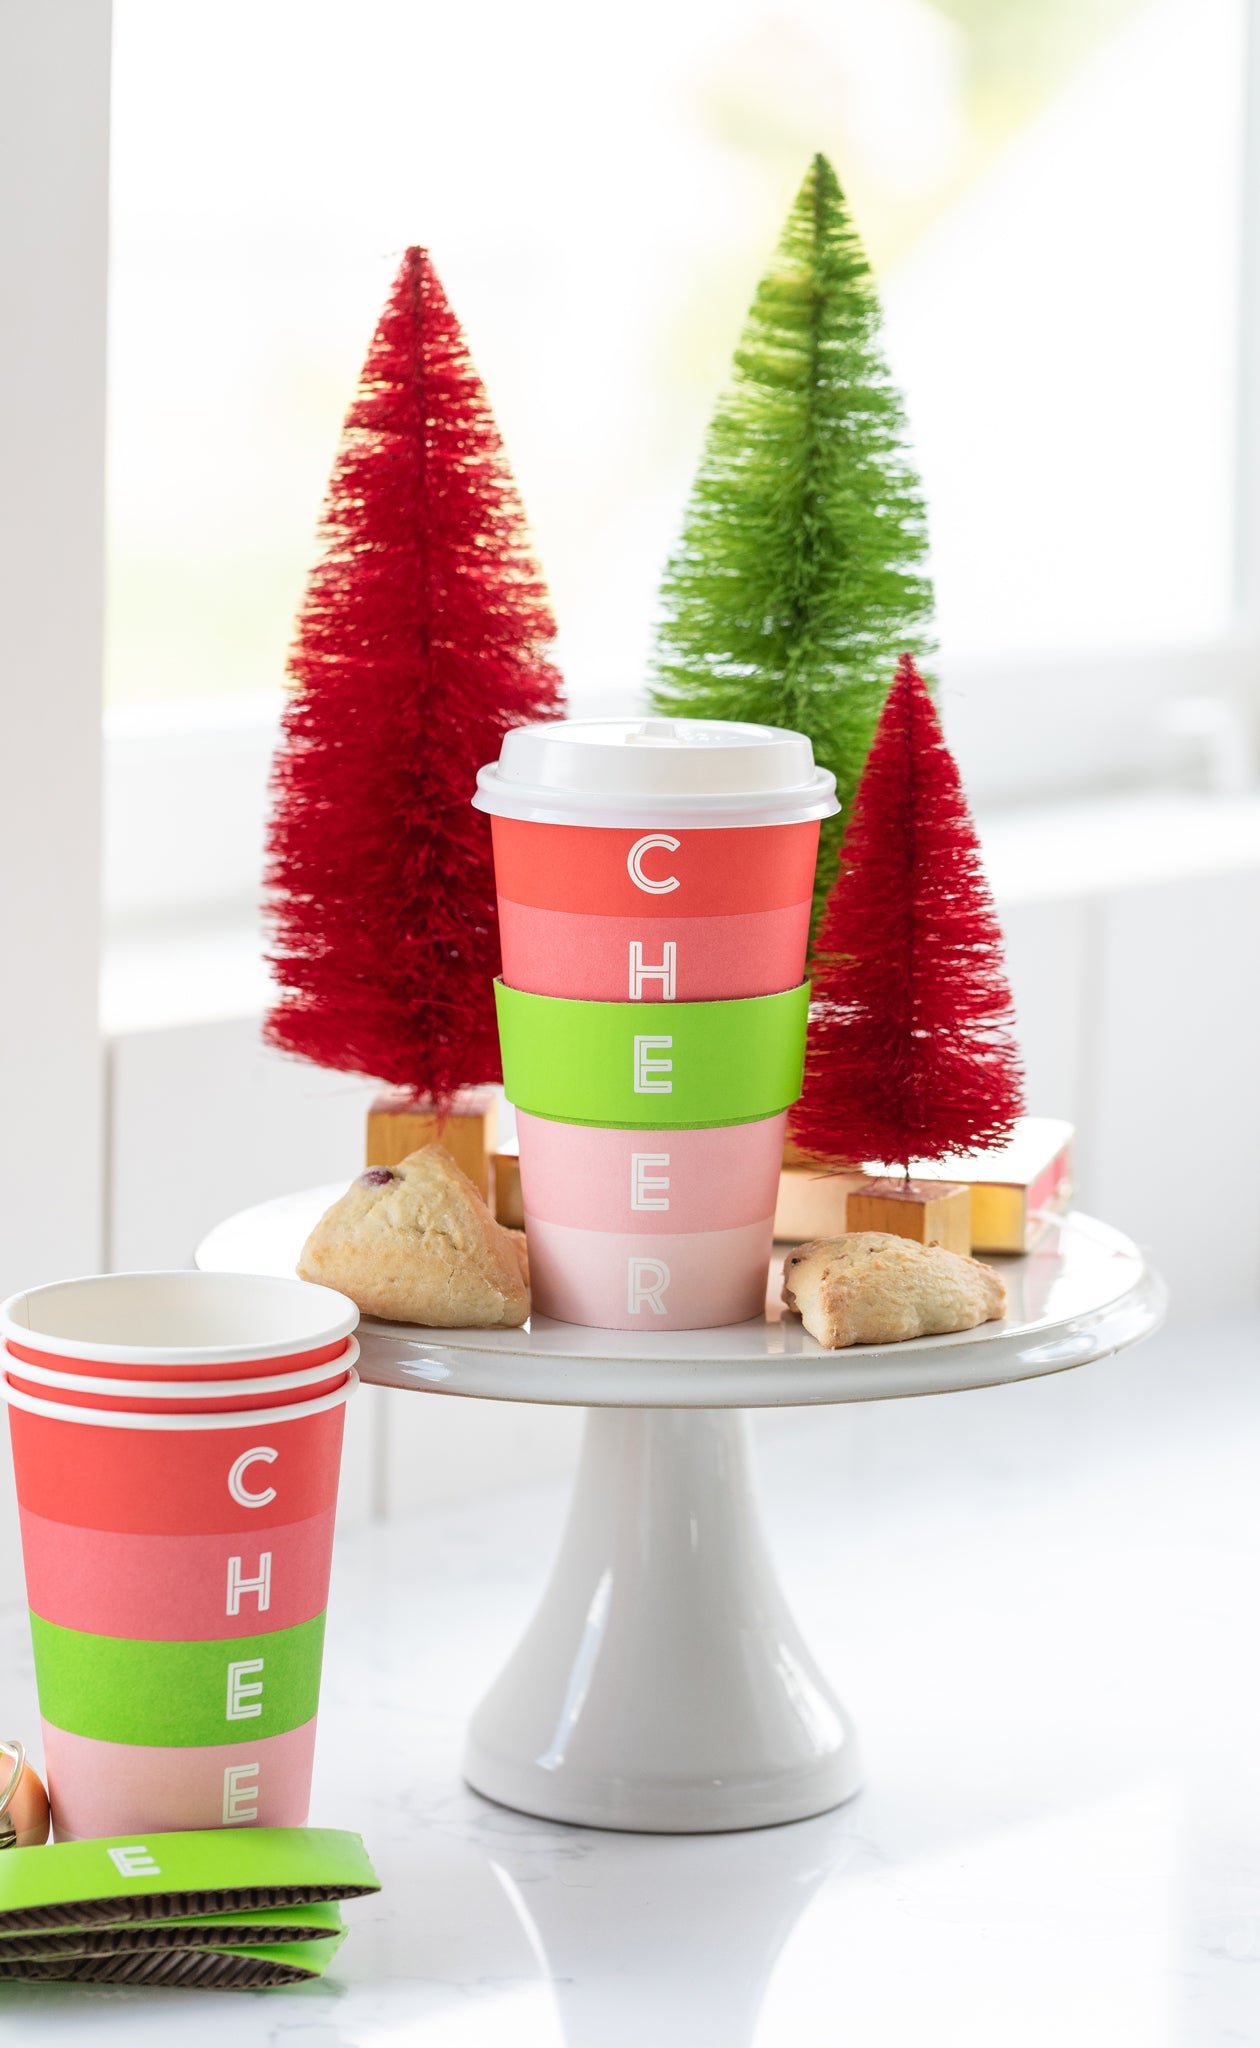 PLLC280 - CHEER To Go Cups 8 ct